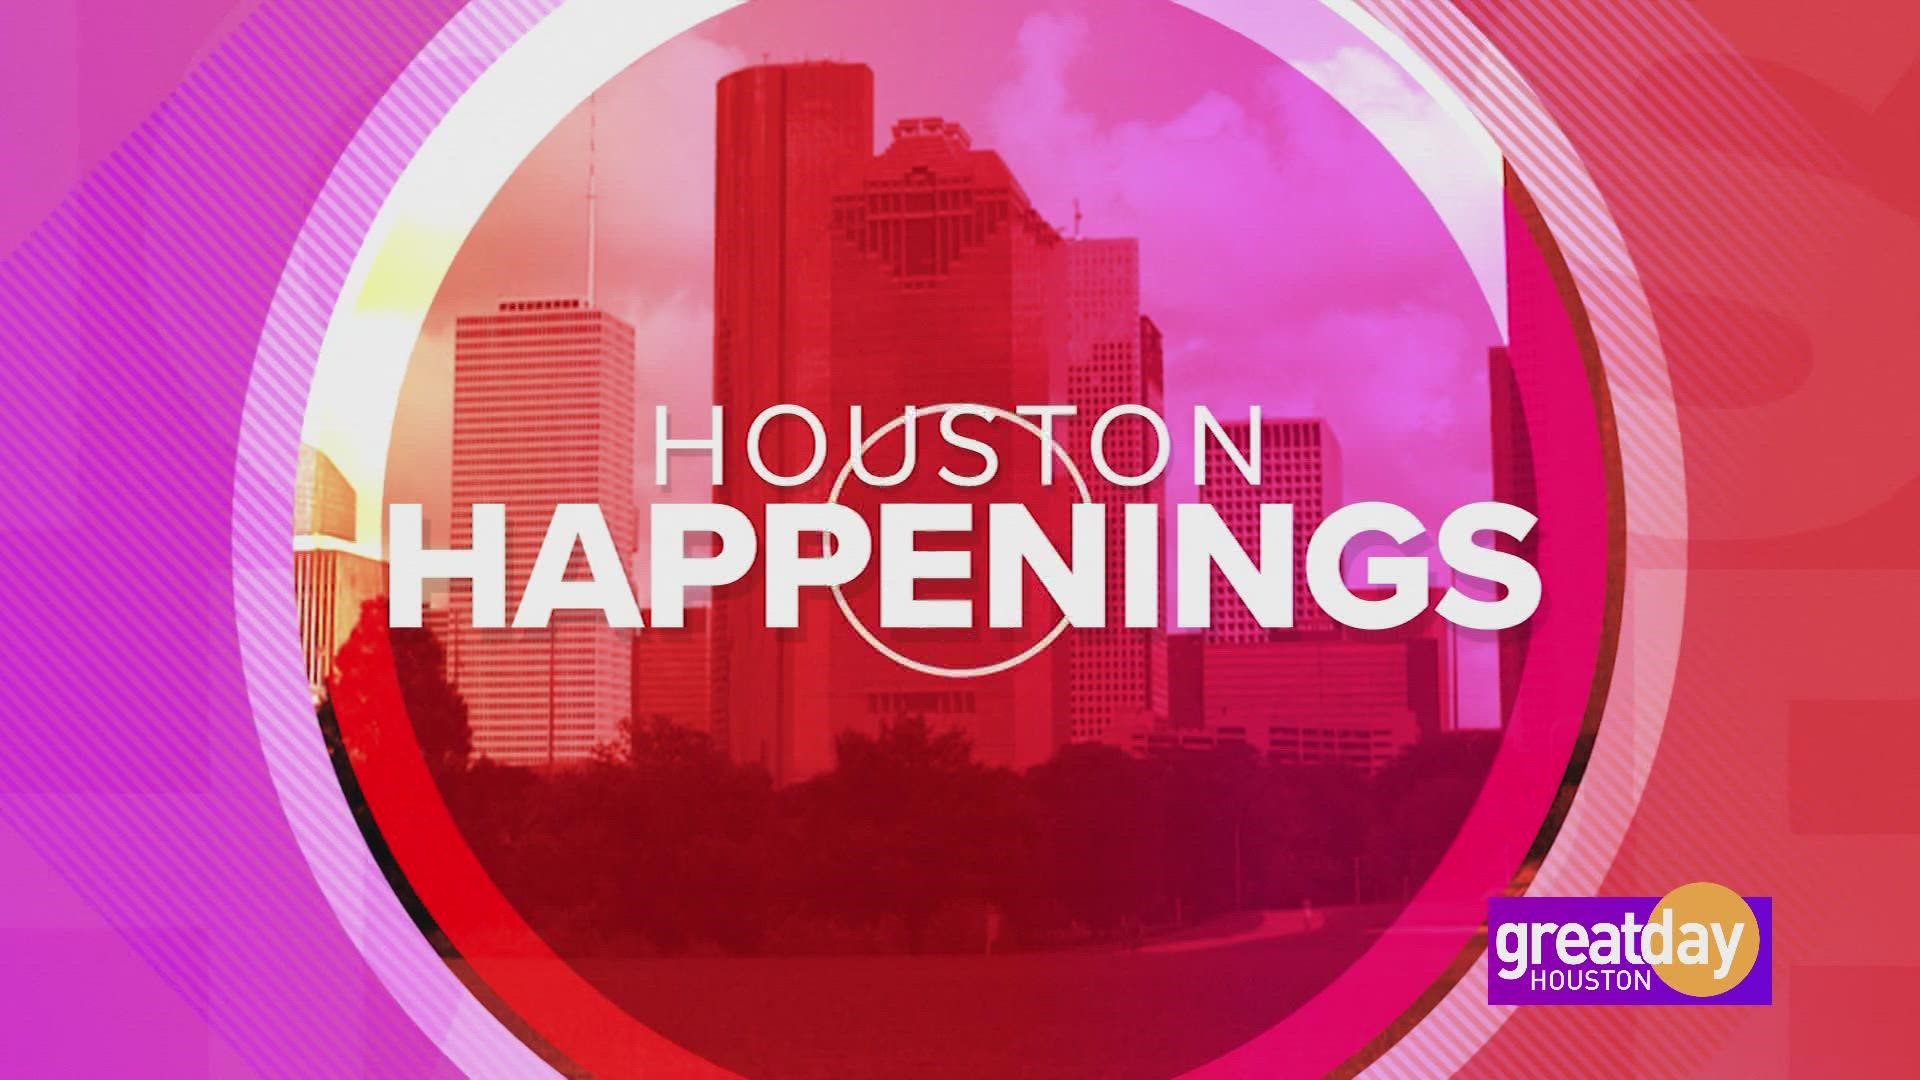 Jennie Bui-McCoy with Houston First discusses this weekend's hottest events